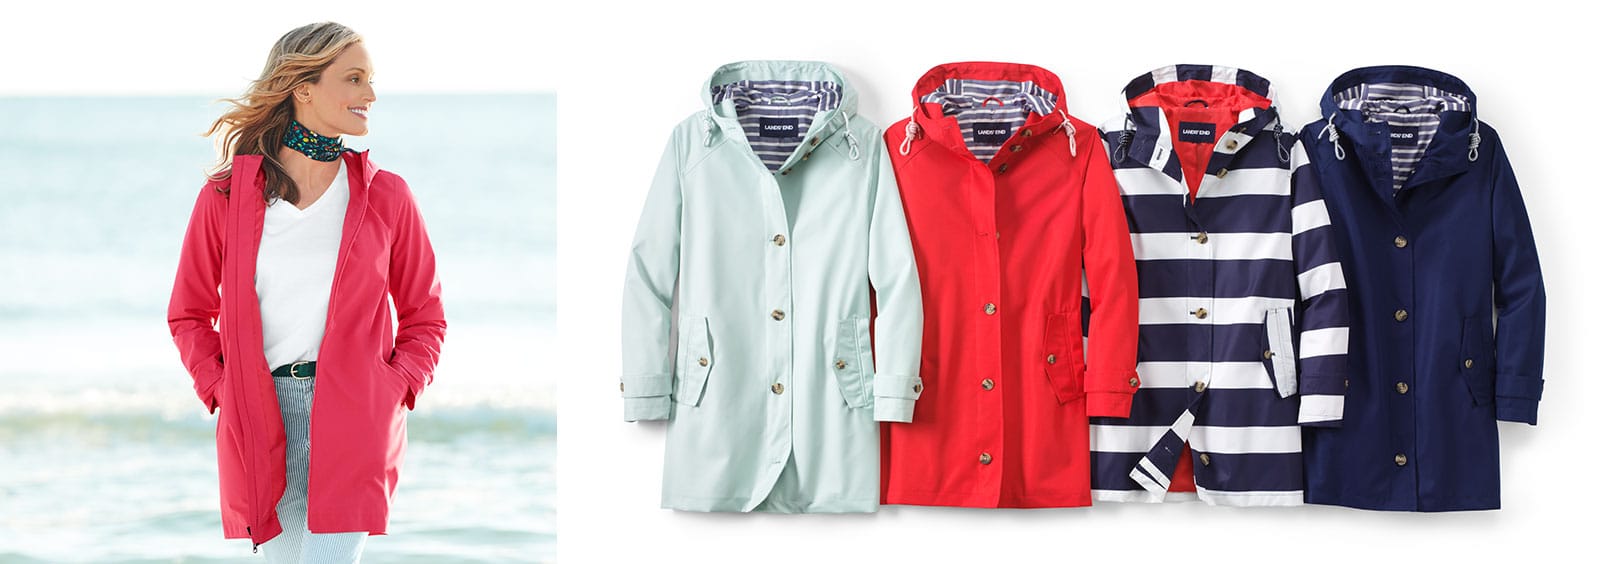 Are raincoats necessary? | Lands' End